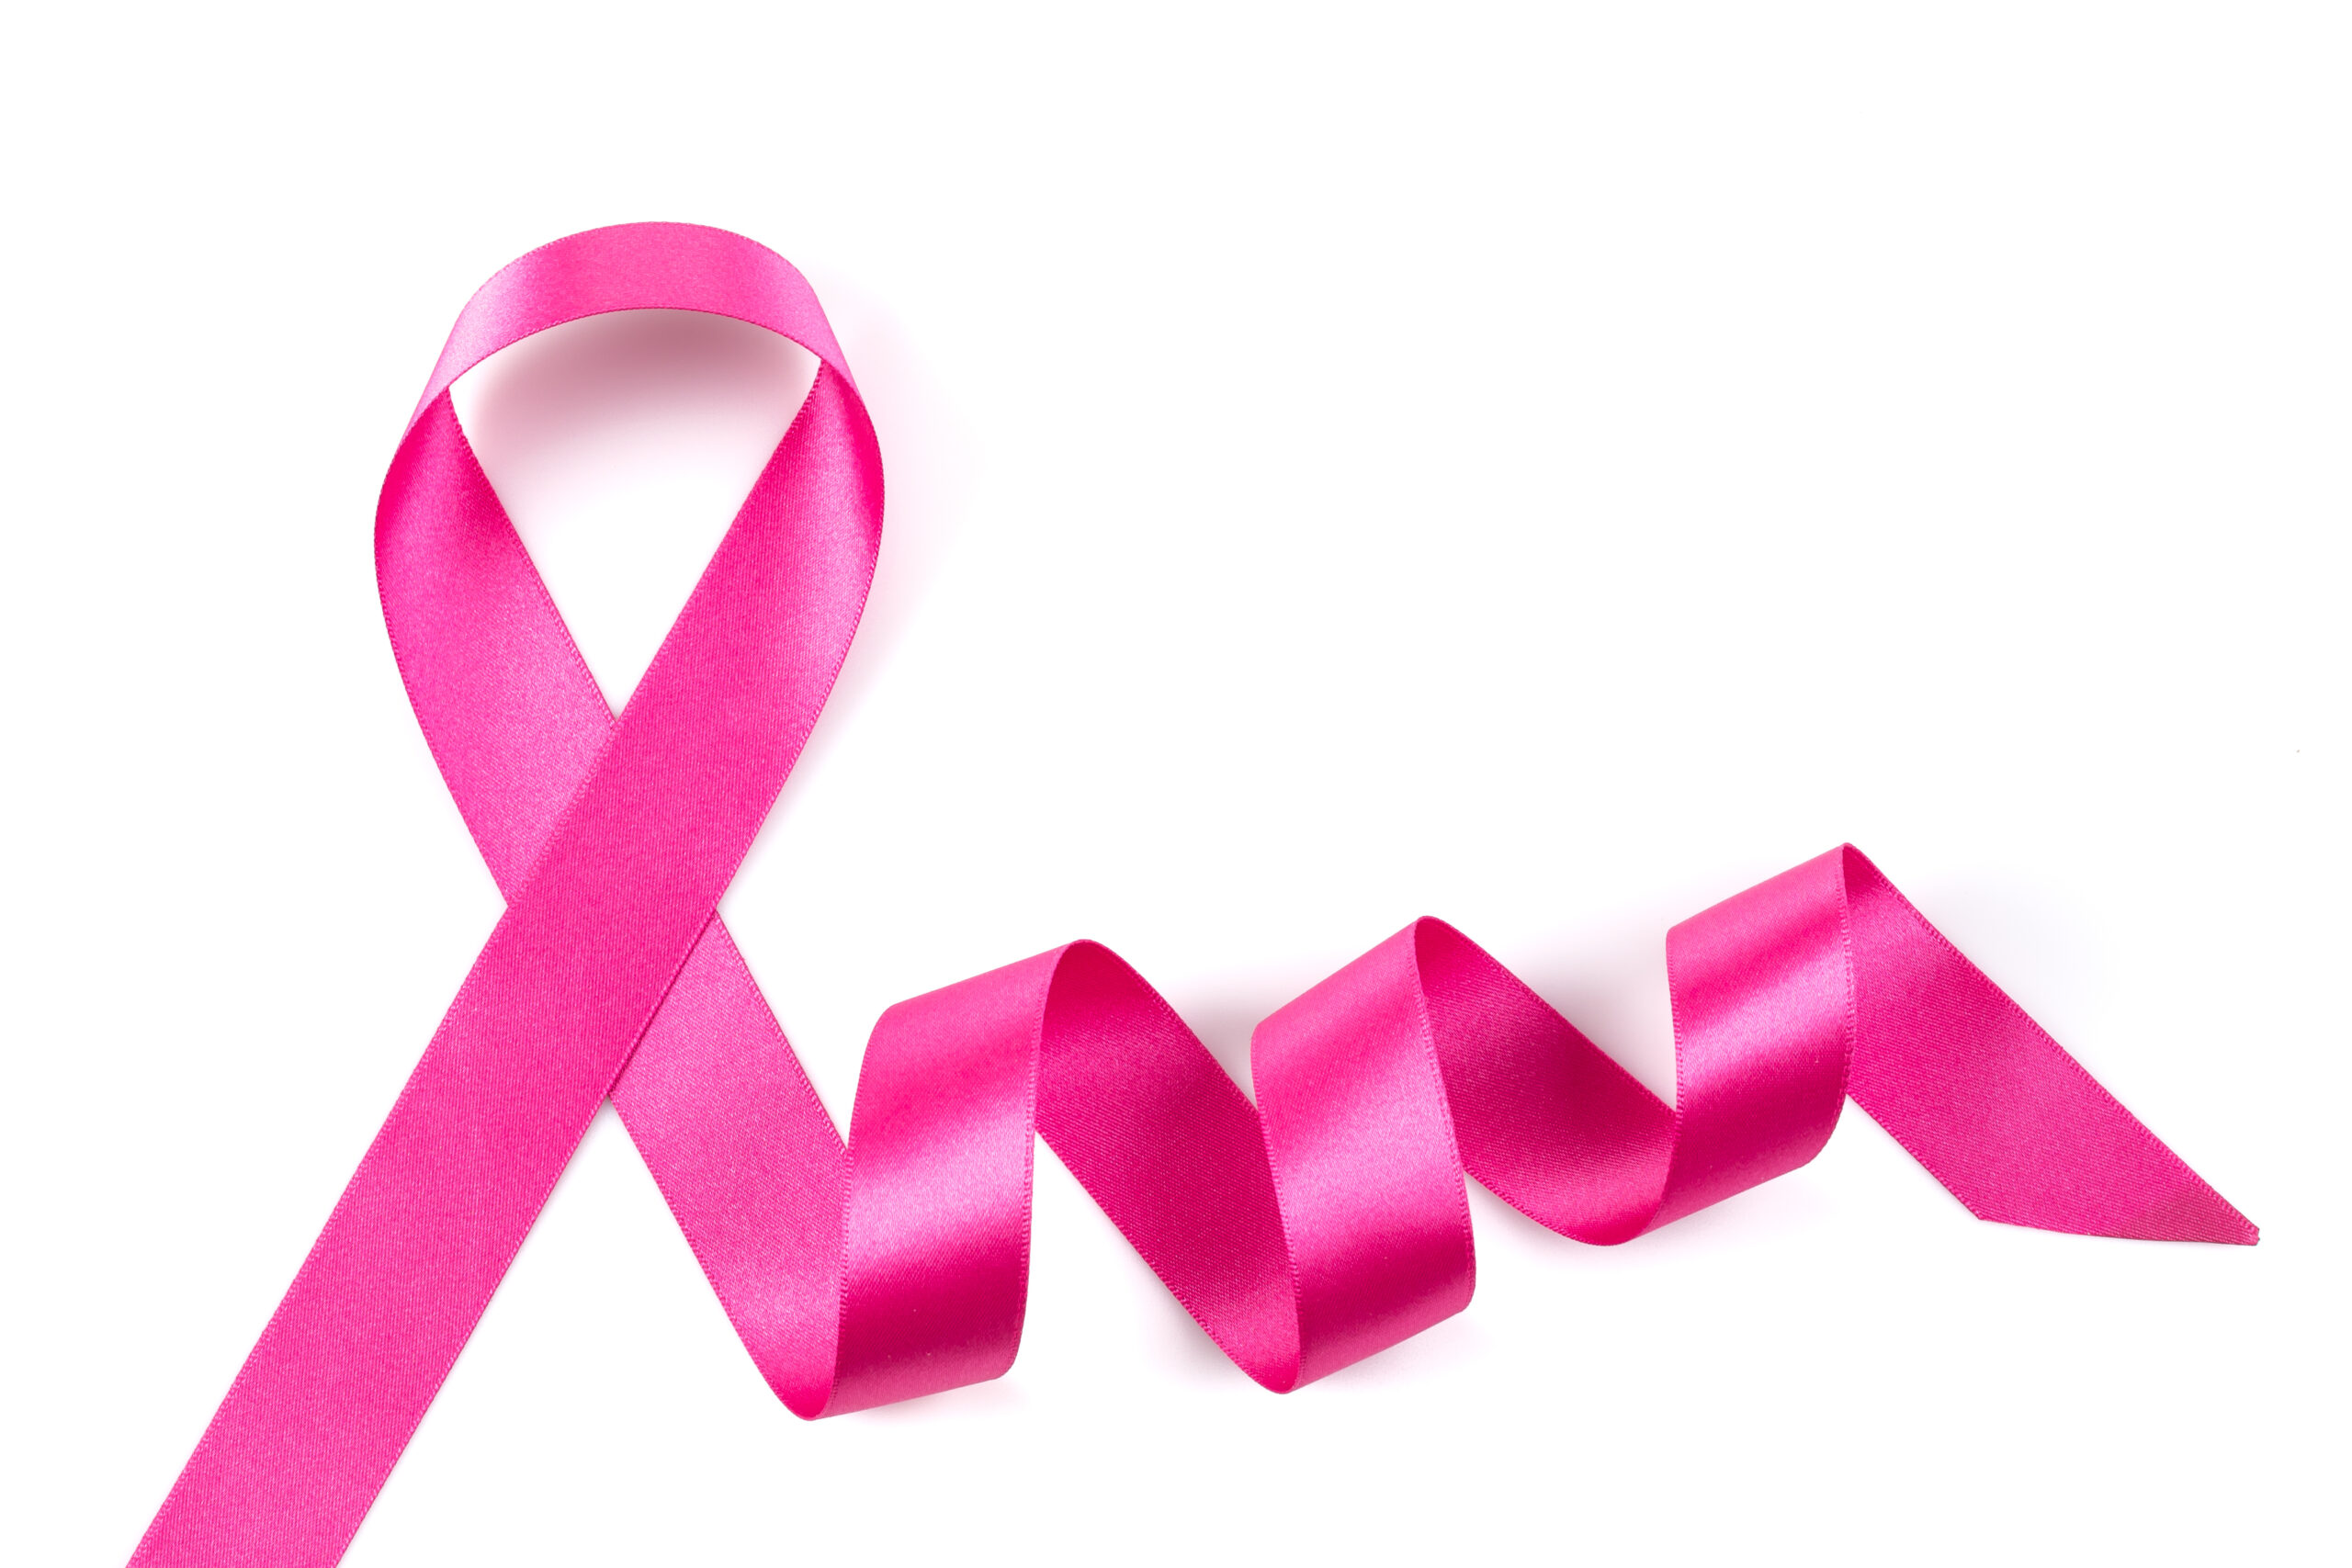 Young women get breast cancer too